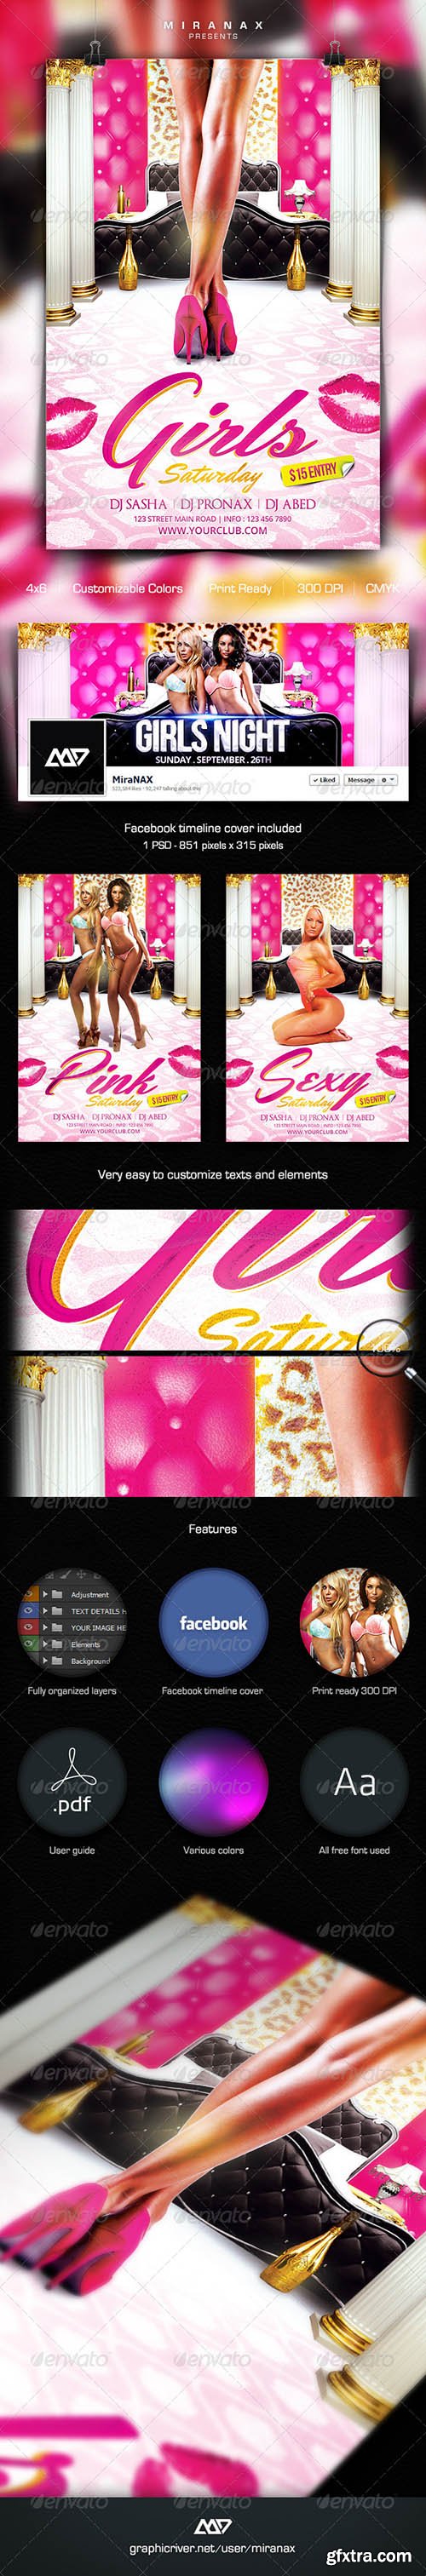 Graphicriver Sexy Girls / Ladies Night Party Flyer Template 6483837